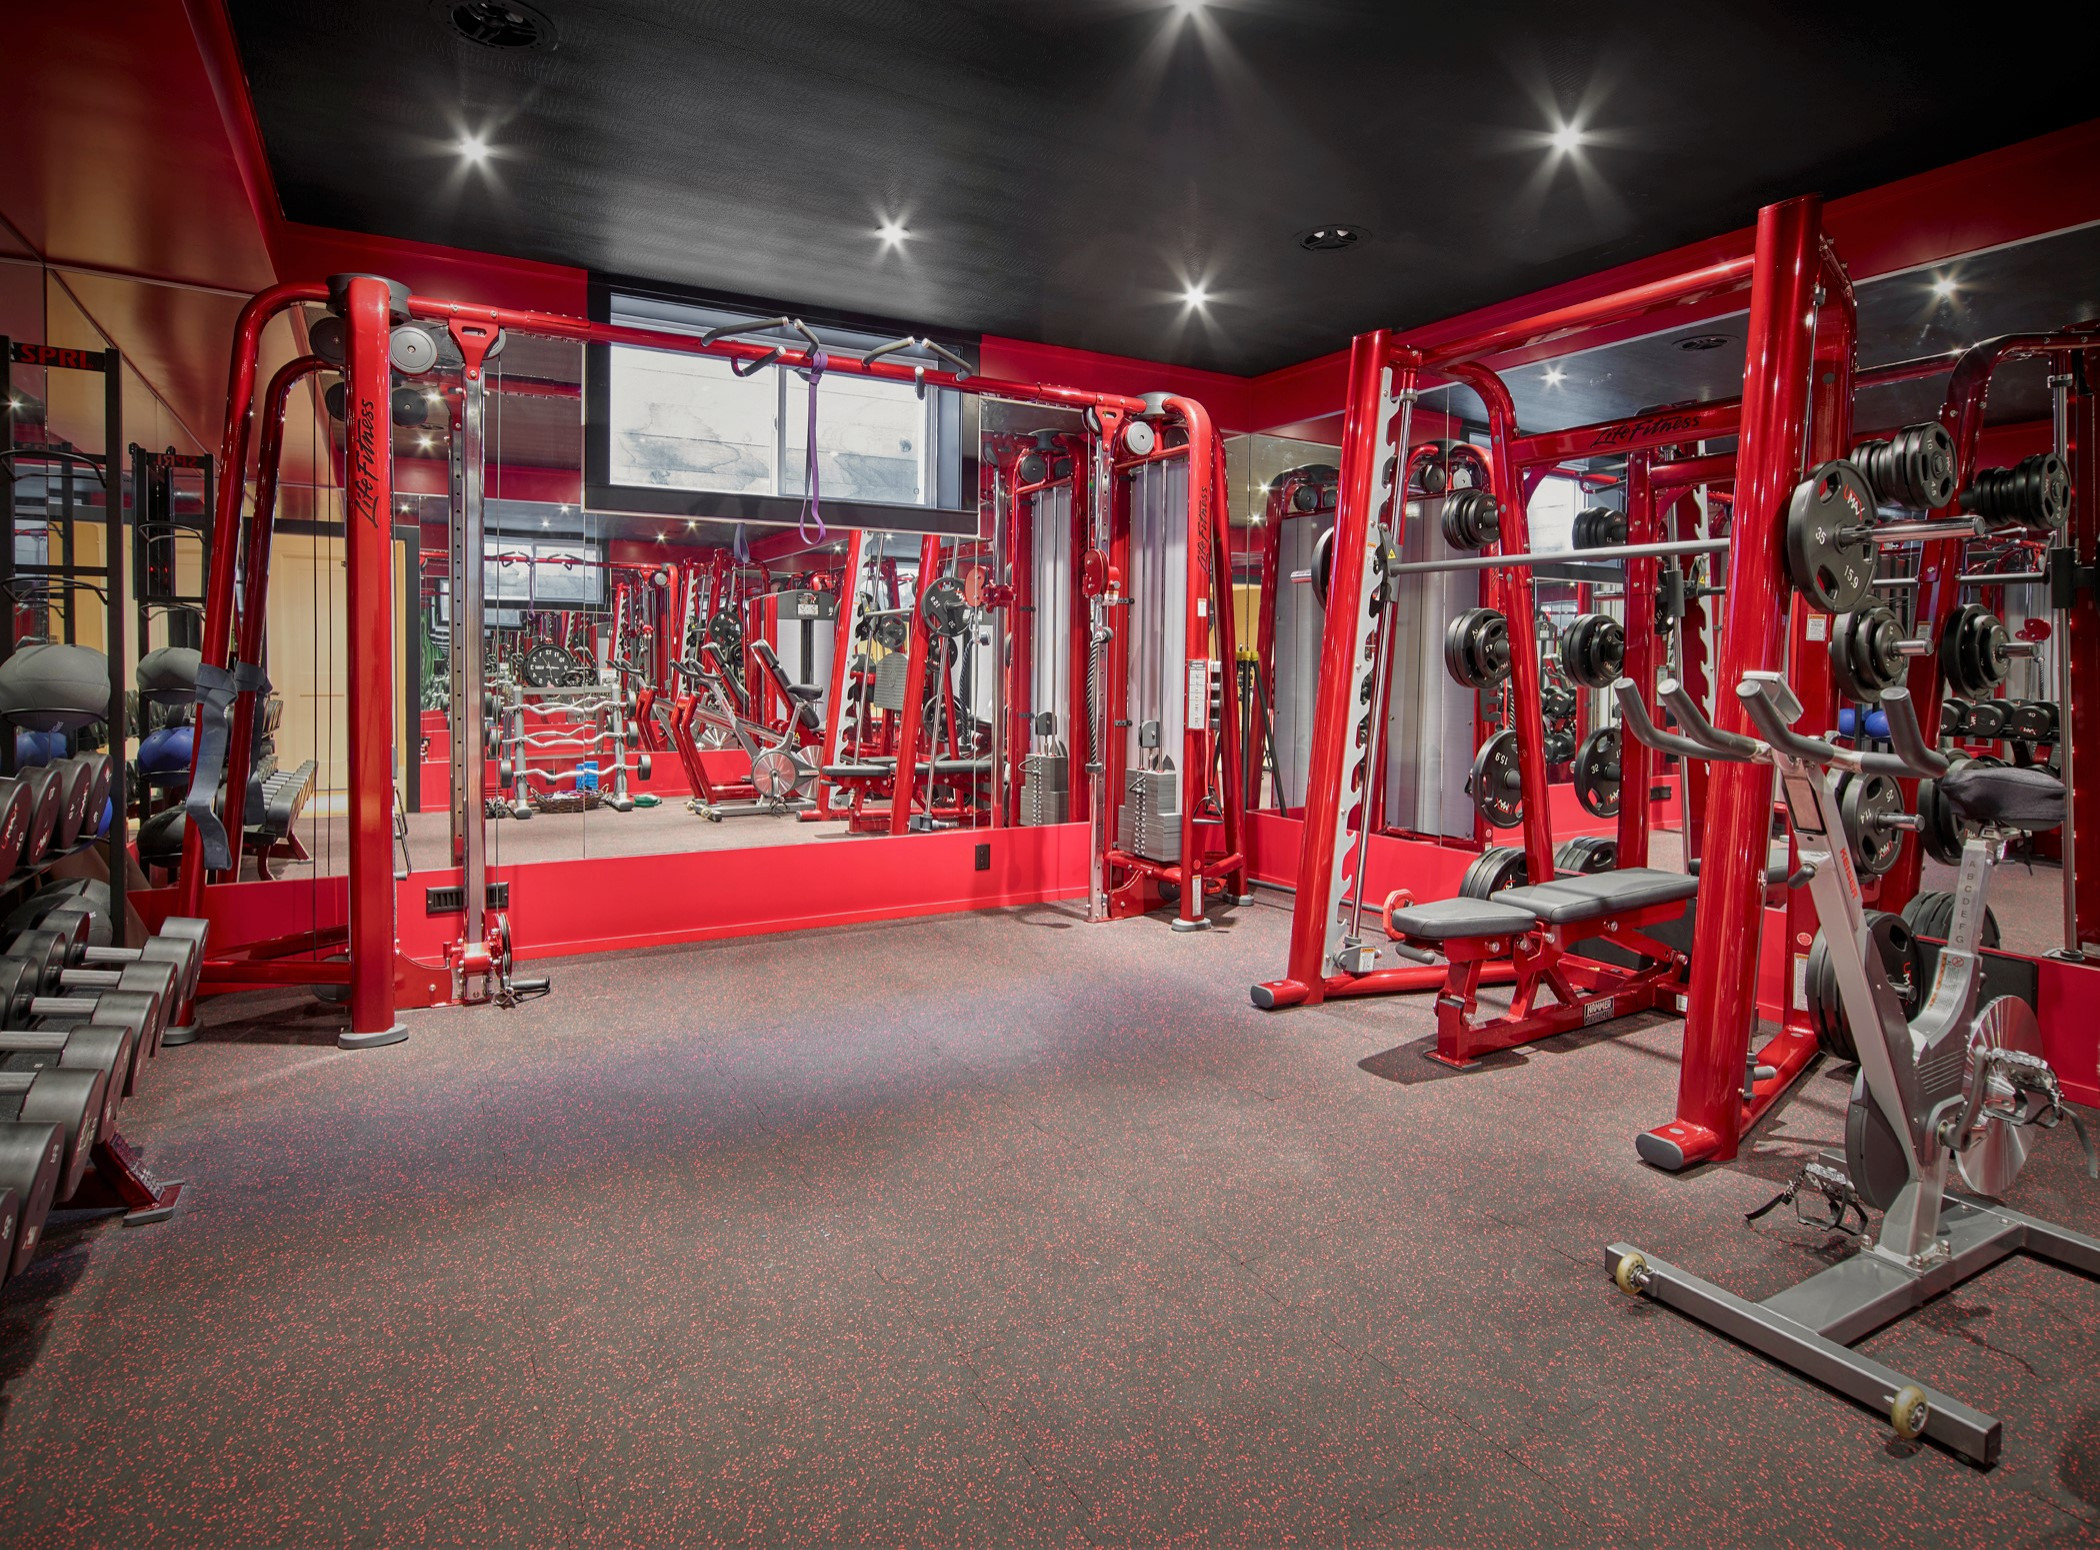 75 Beautiful Home Gym with Red Walls 